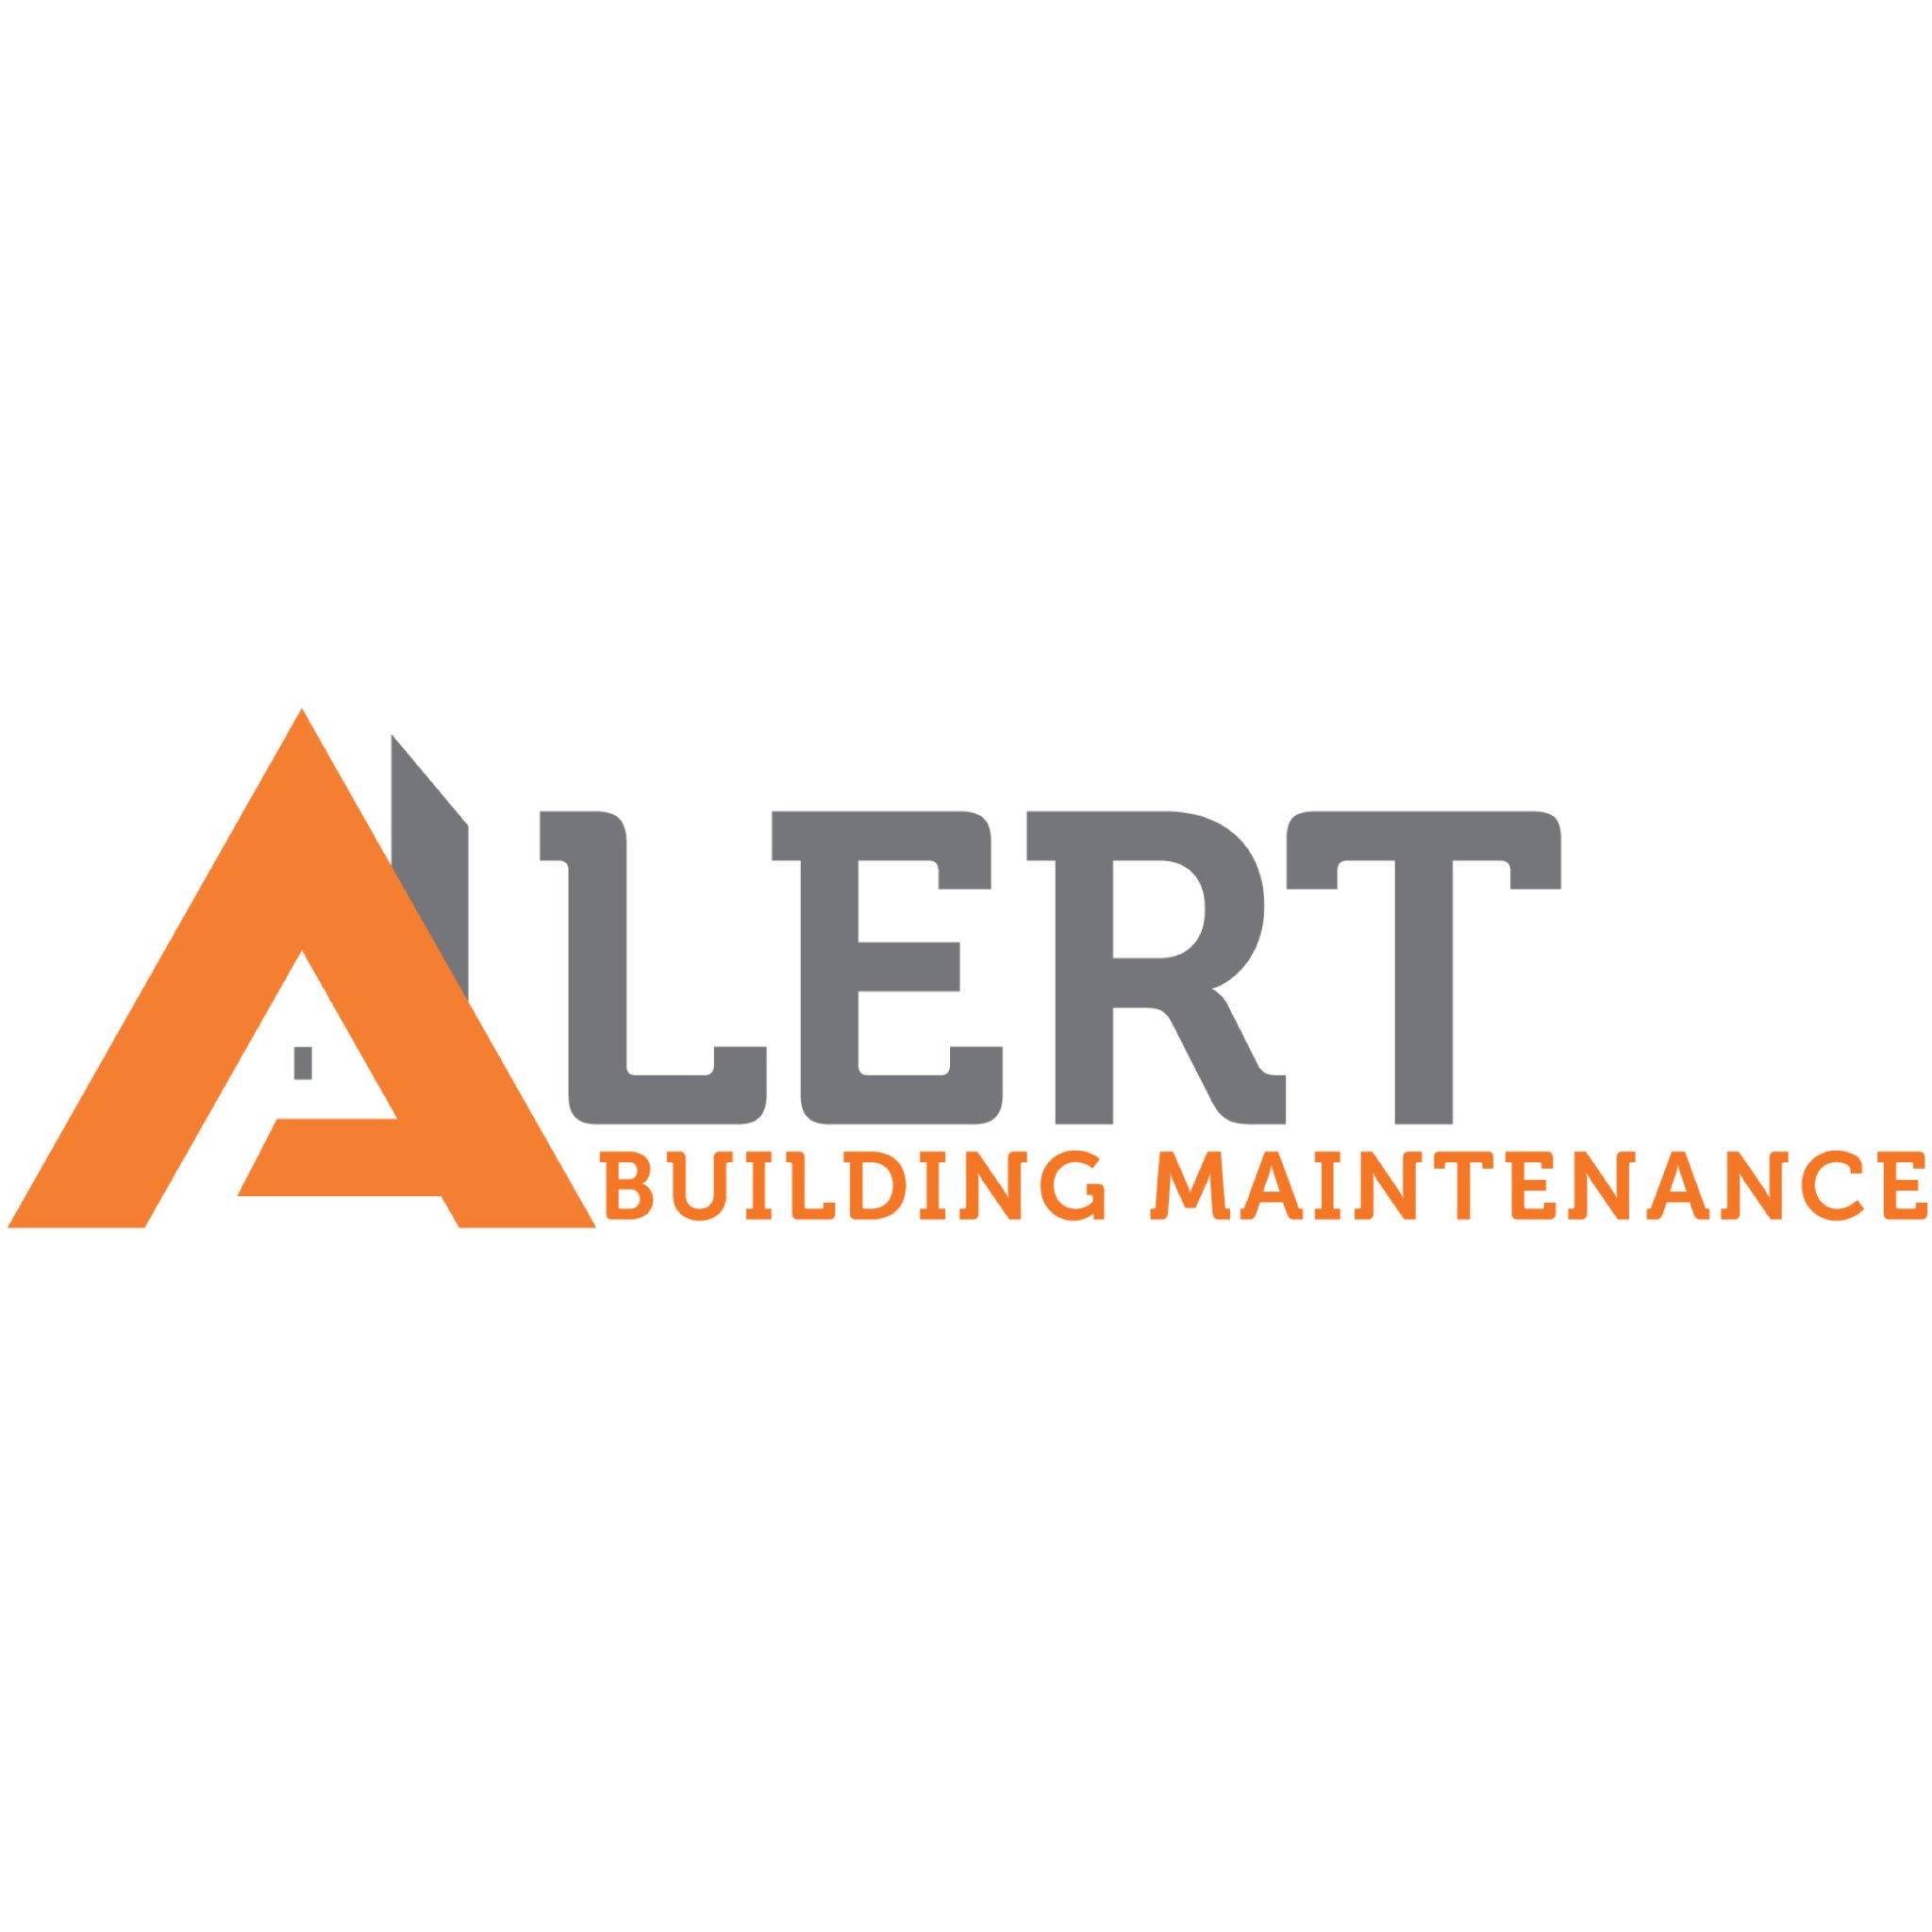 At Alert Building Maintenance we aspire to provide the highest standards across a full platform of property maintenance services.